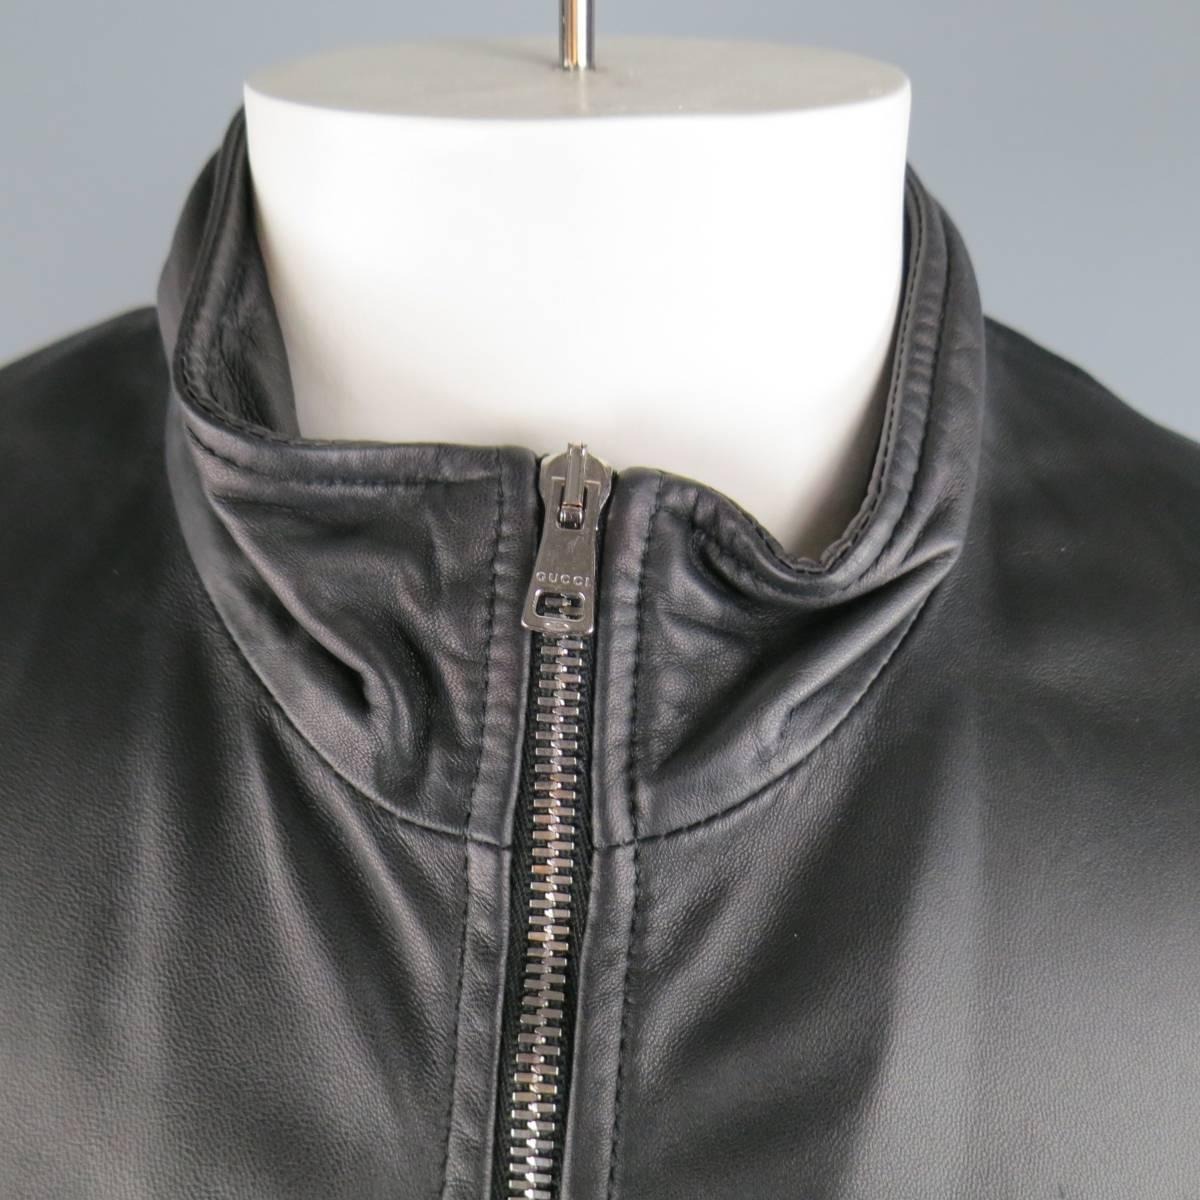 GUCCI tailored bomber jacket in a soft matte black leather featuring a high collar, silver tone zip closure, slit pockets, embossed sleeve logo, and stretch band hems with internal stripe detail. Wear throughout bands. Made in Italy.
 
Good